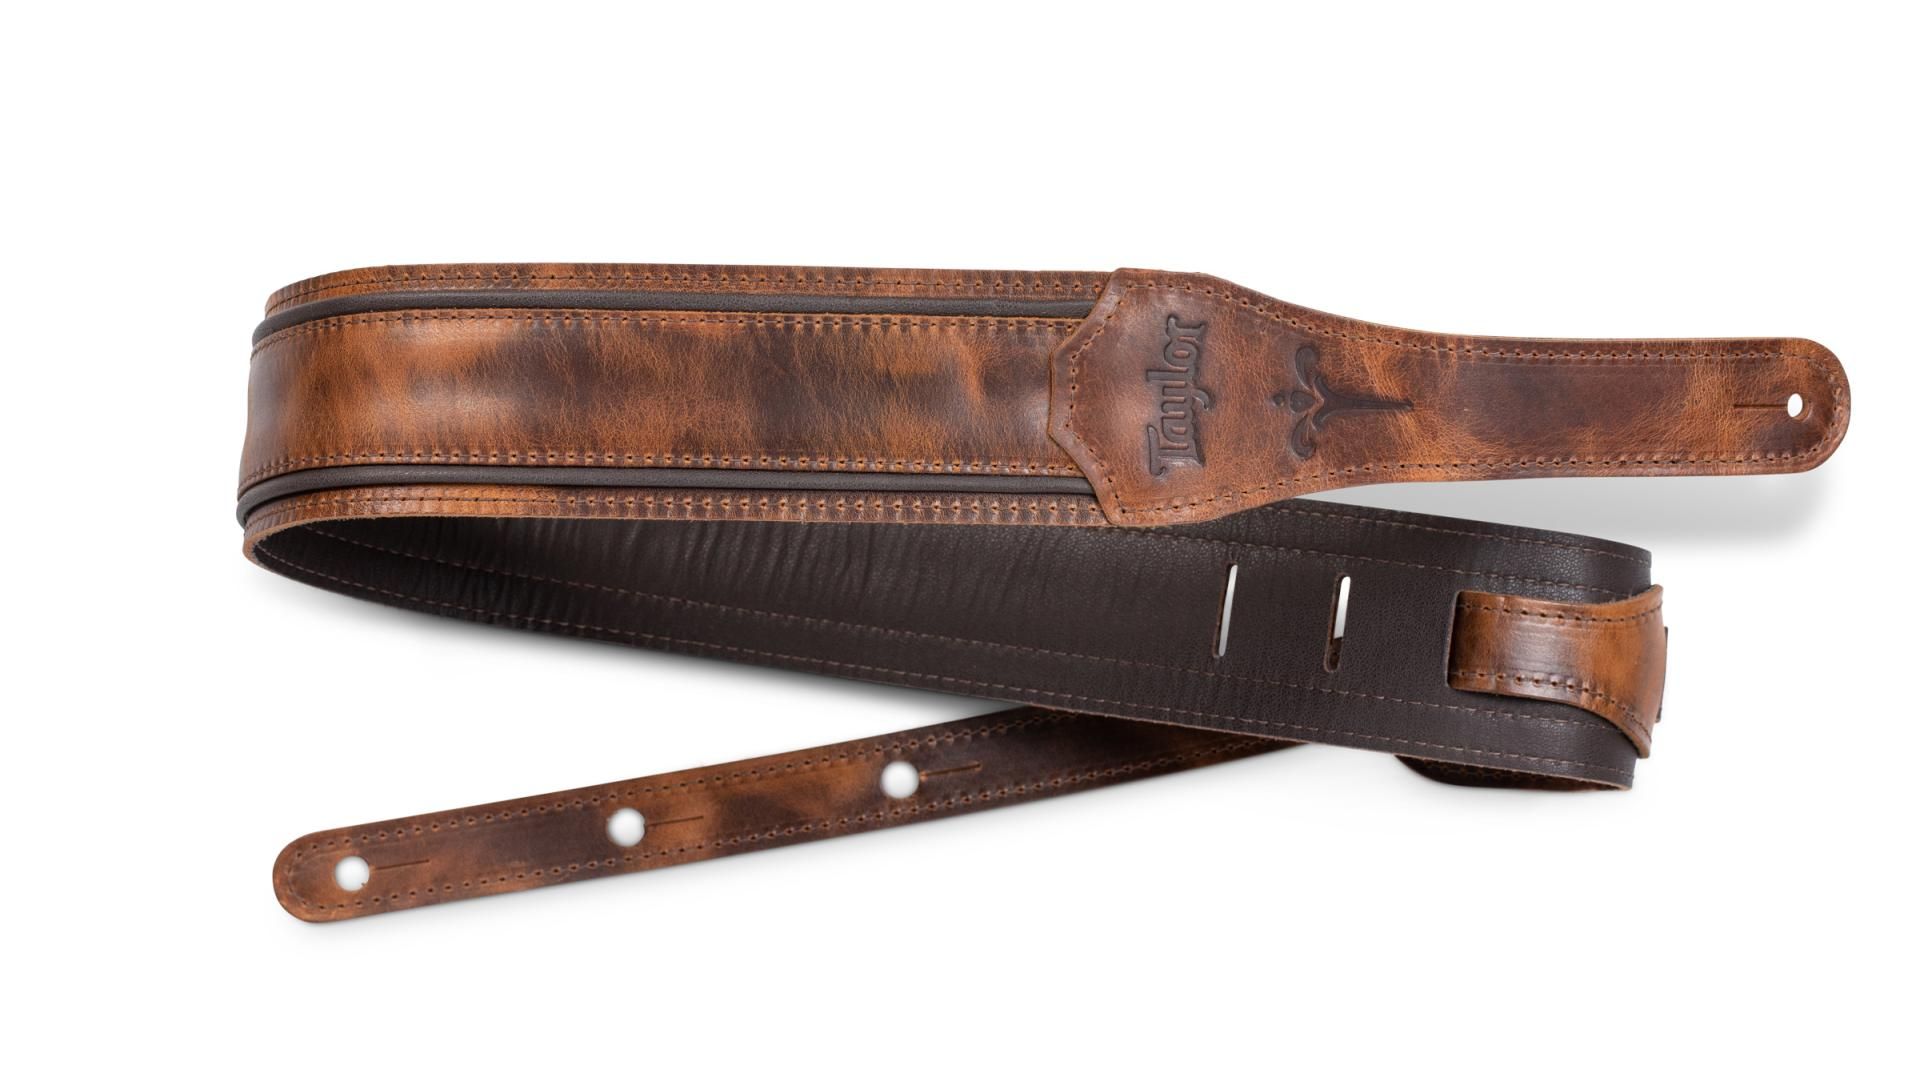 Taylor Fountain Strap, Leather, 2.5, Weathered Brn